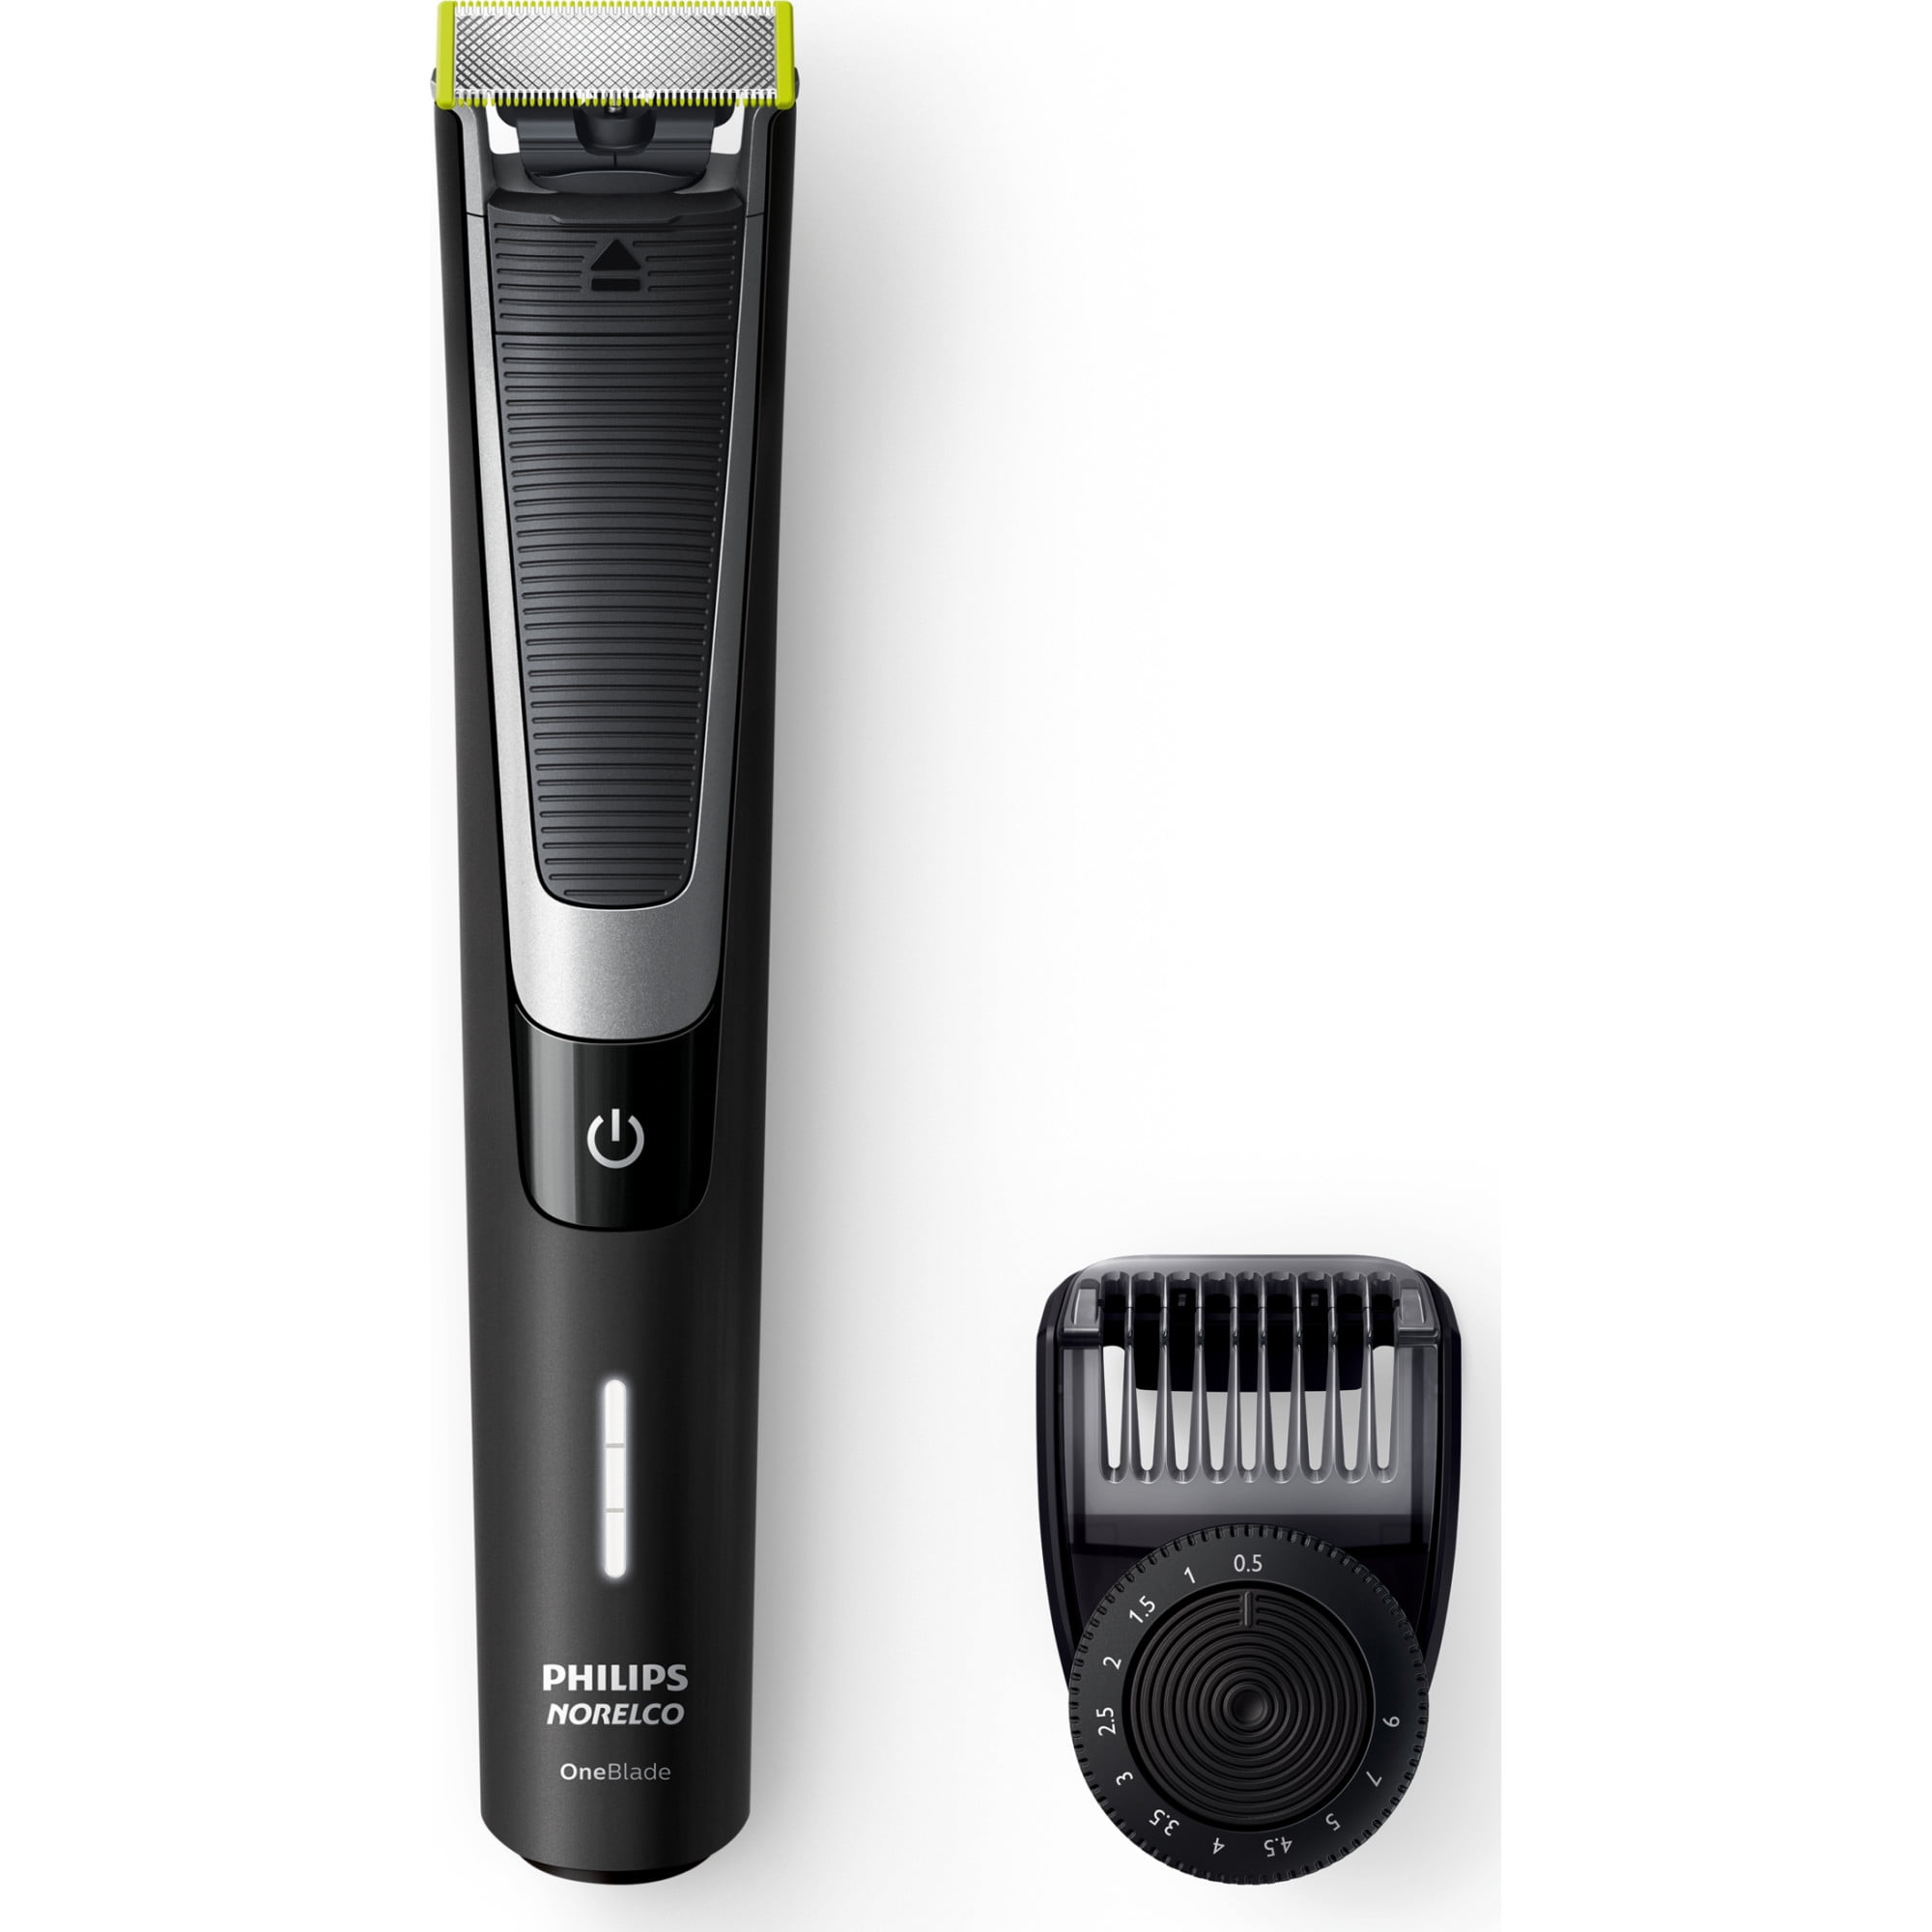 Philips Norelco Oneblade Pro Hybrid Electric Trimmer and Shaver